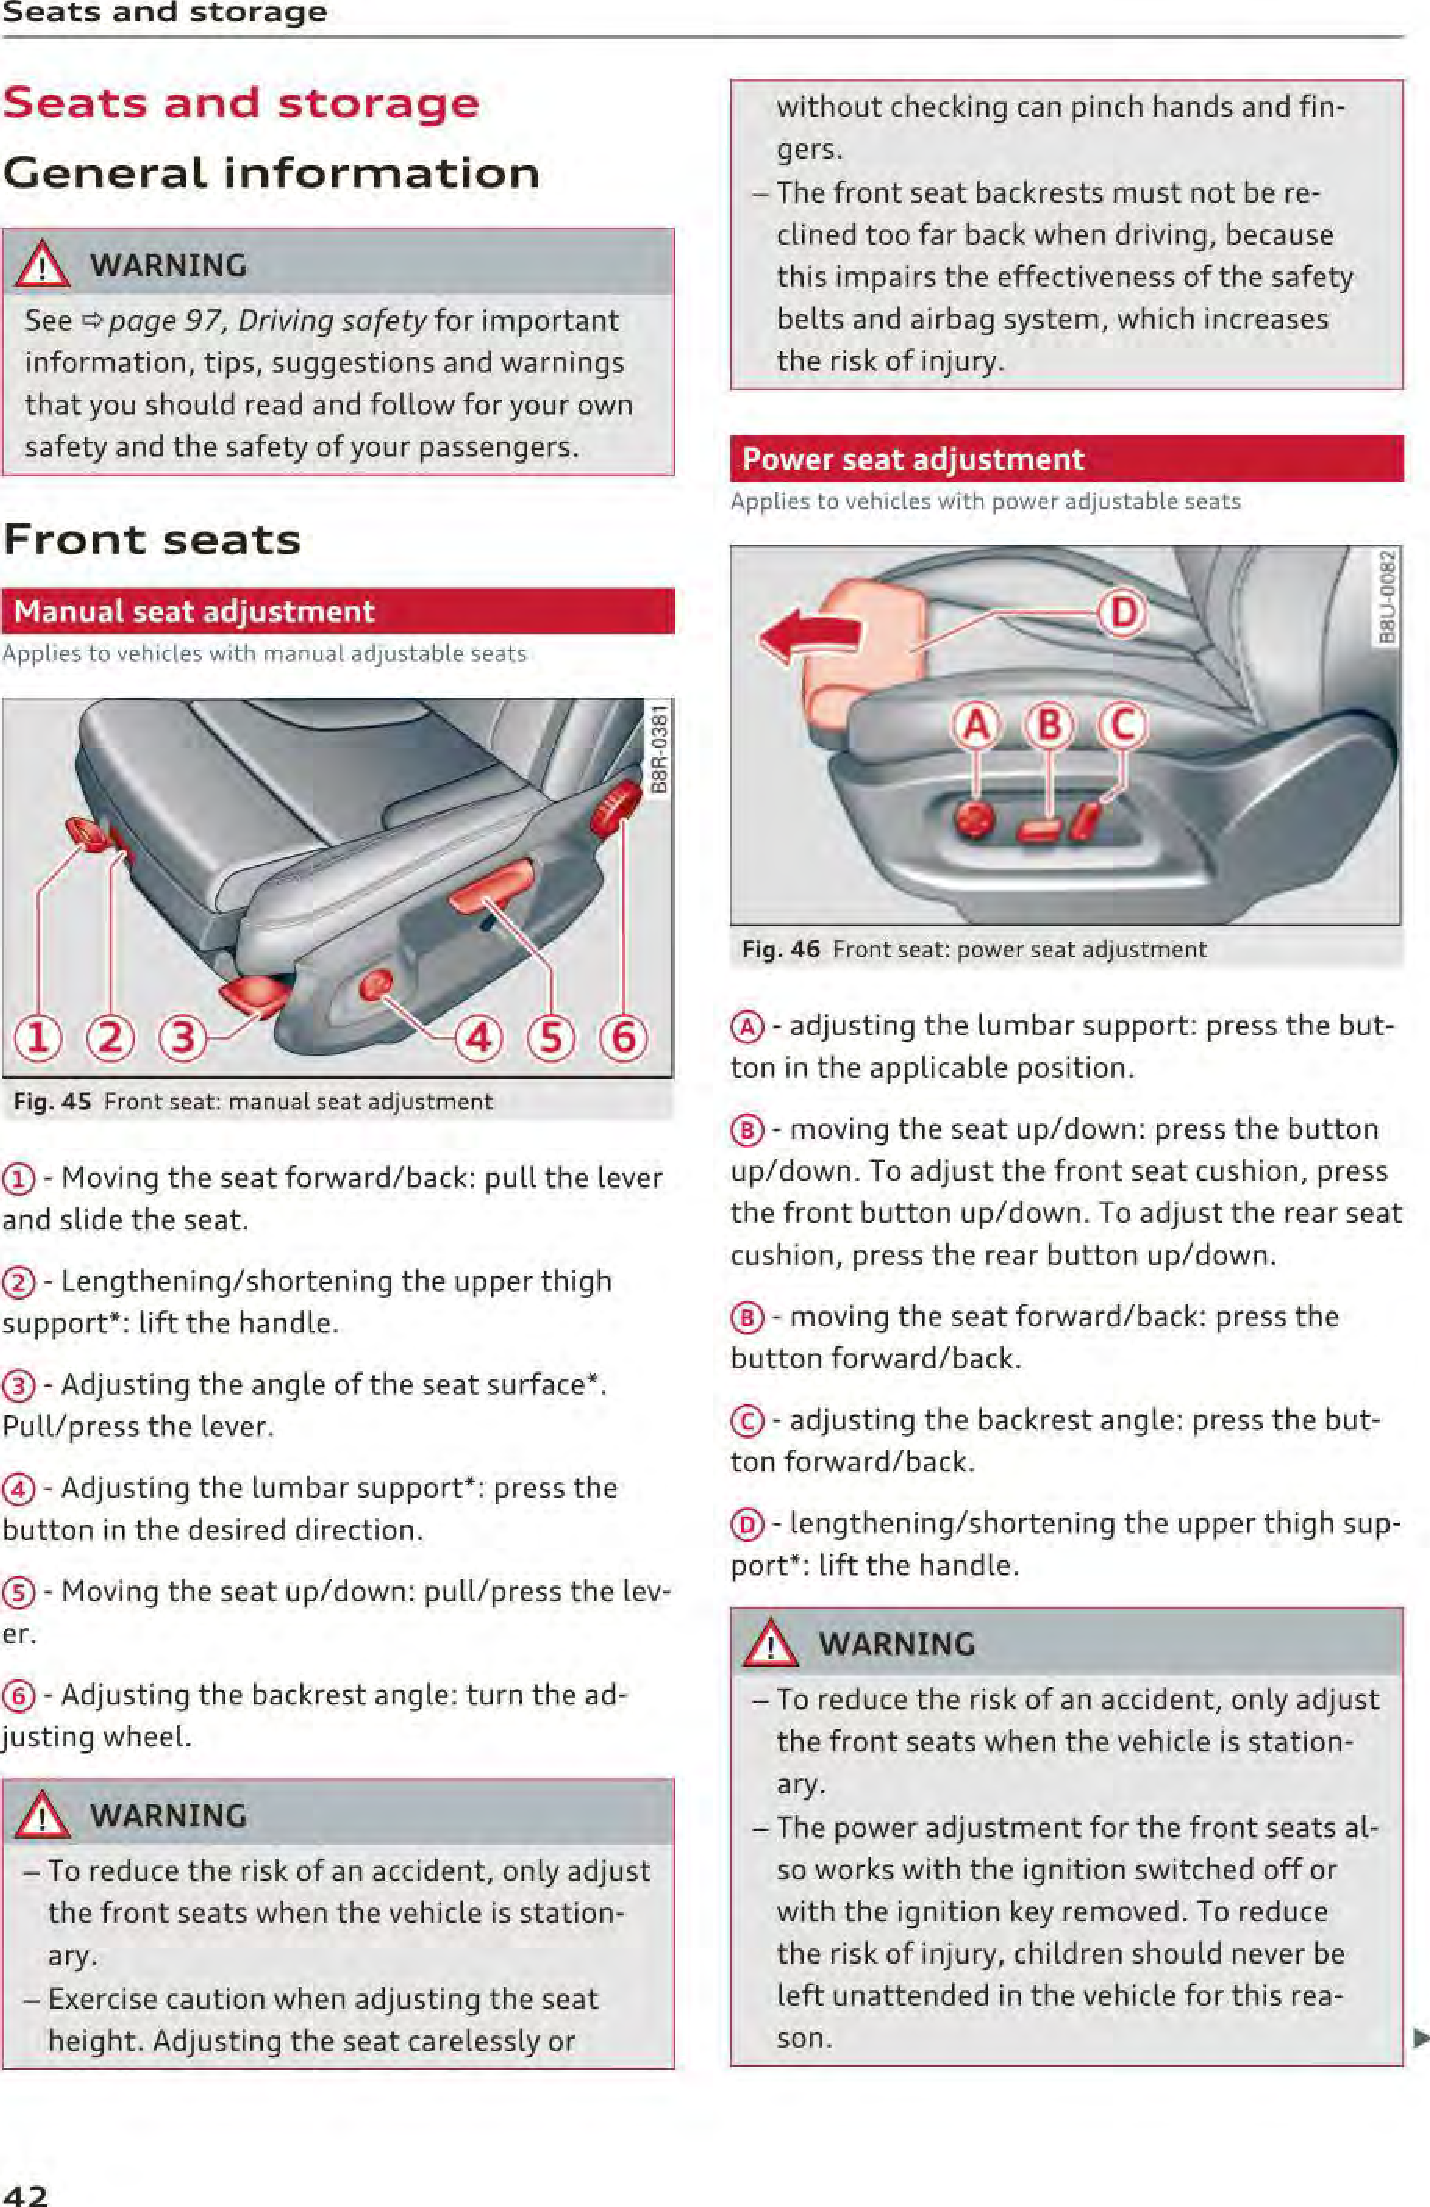 Page 44 of Robert Bosch Car Multimedia AUFPK20 Instrument cluster with immobilizer User Manual part 1